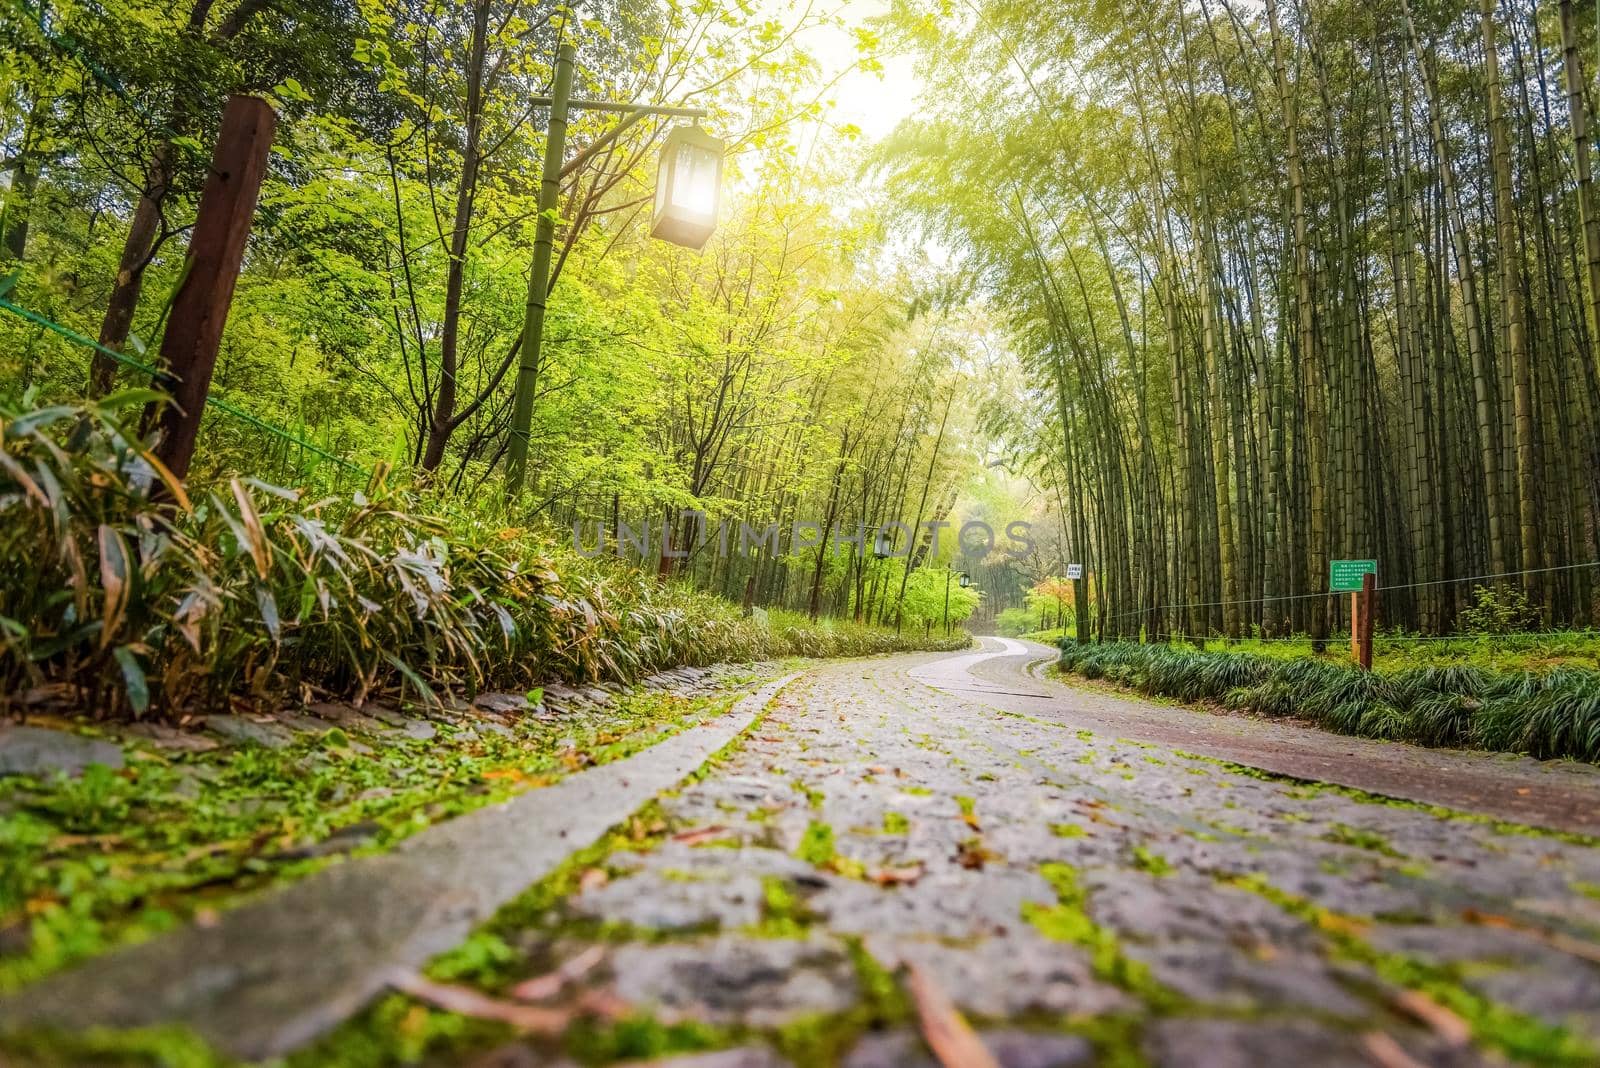 A path in china with bamboo trees, a path in a tourist park in china